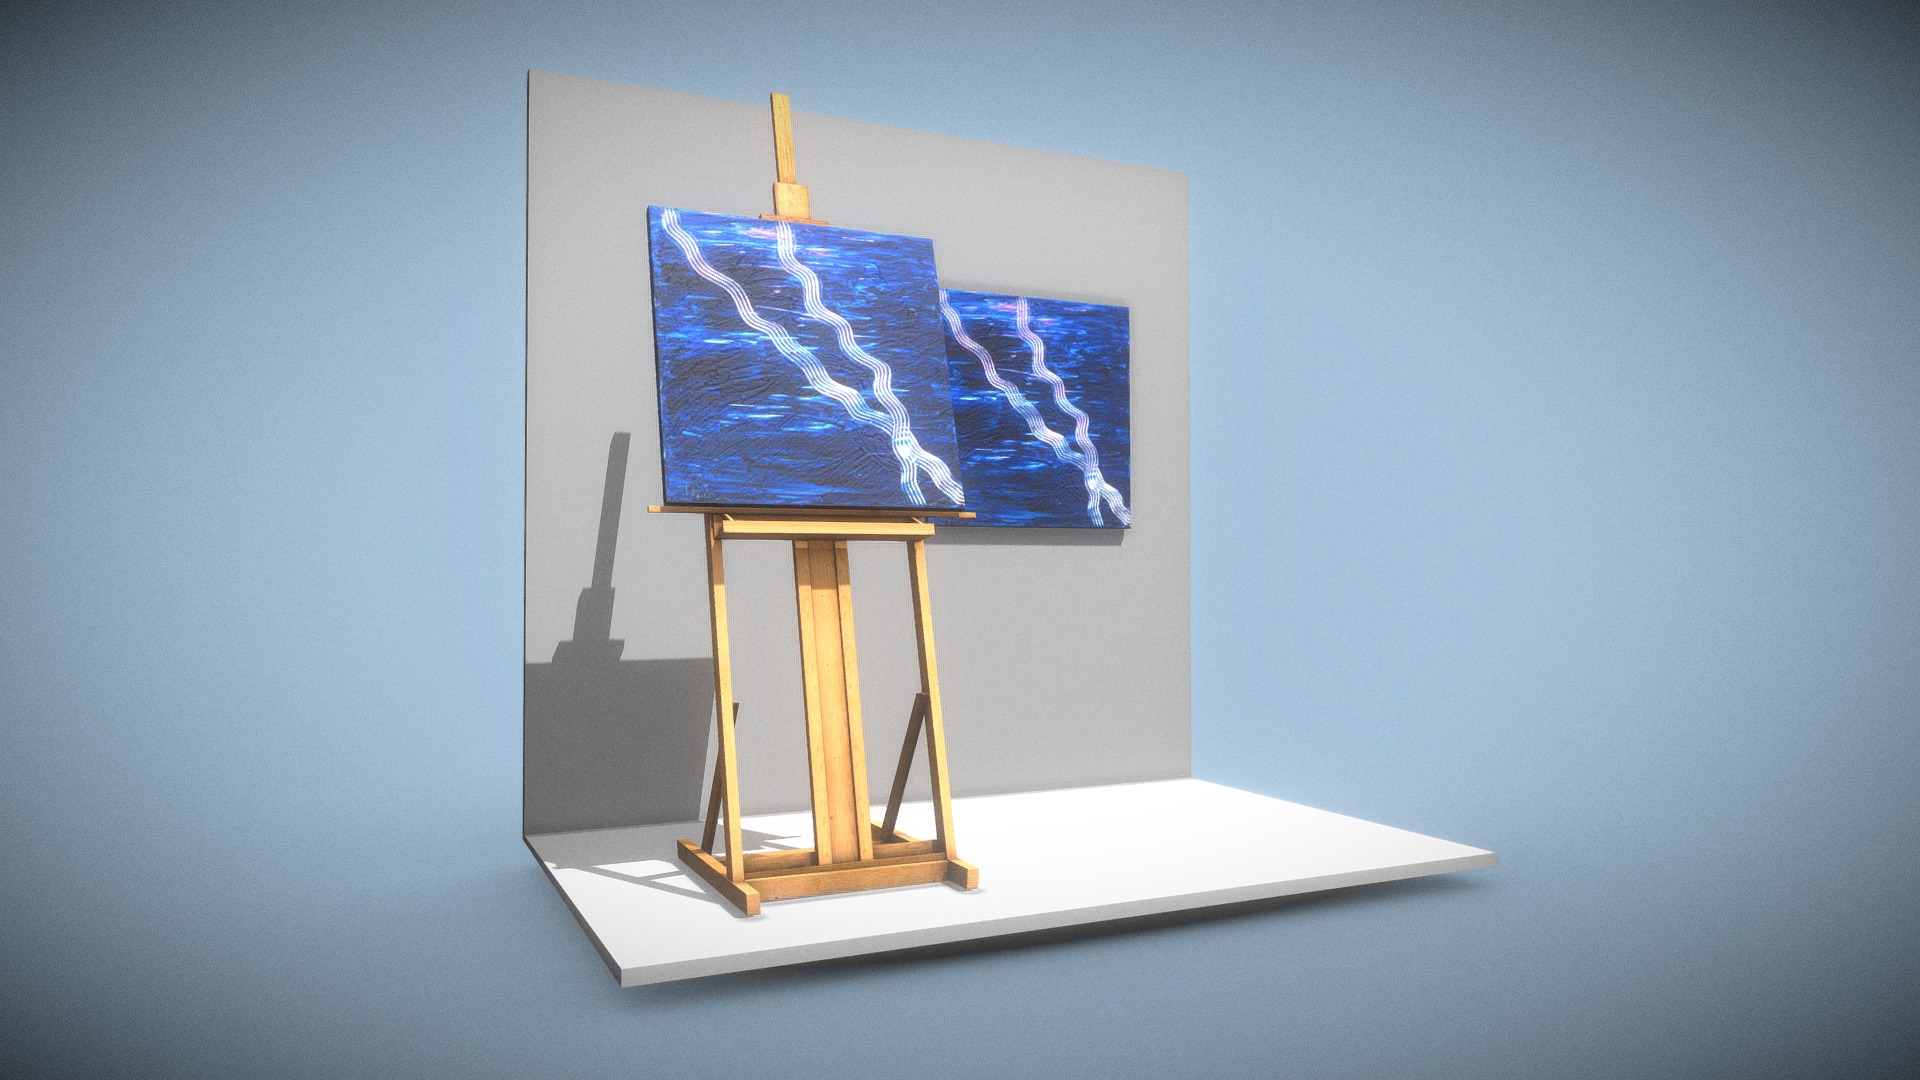 3D model Blue Transformation No.3 – Oil Painting - This is a 3D model of the Blue Transformation No.3 - Oil Painting. The 3D model is about a painting on a stand.